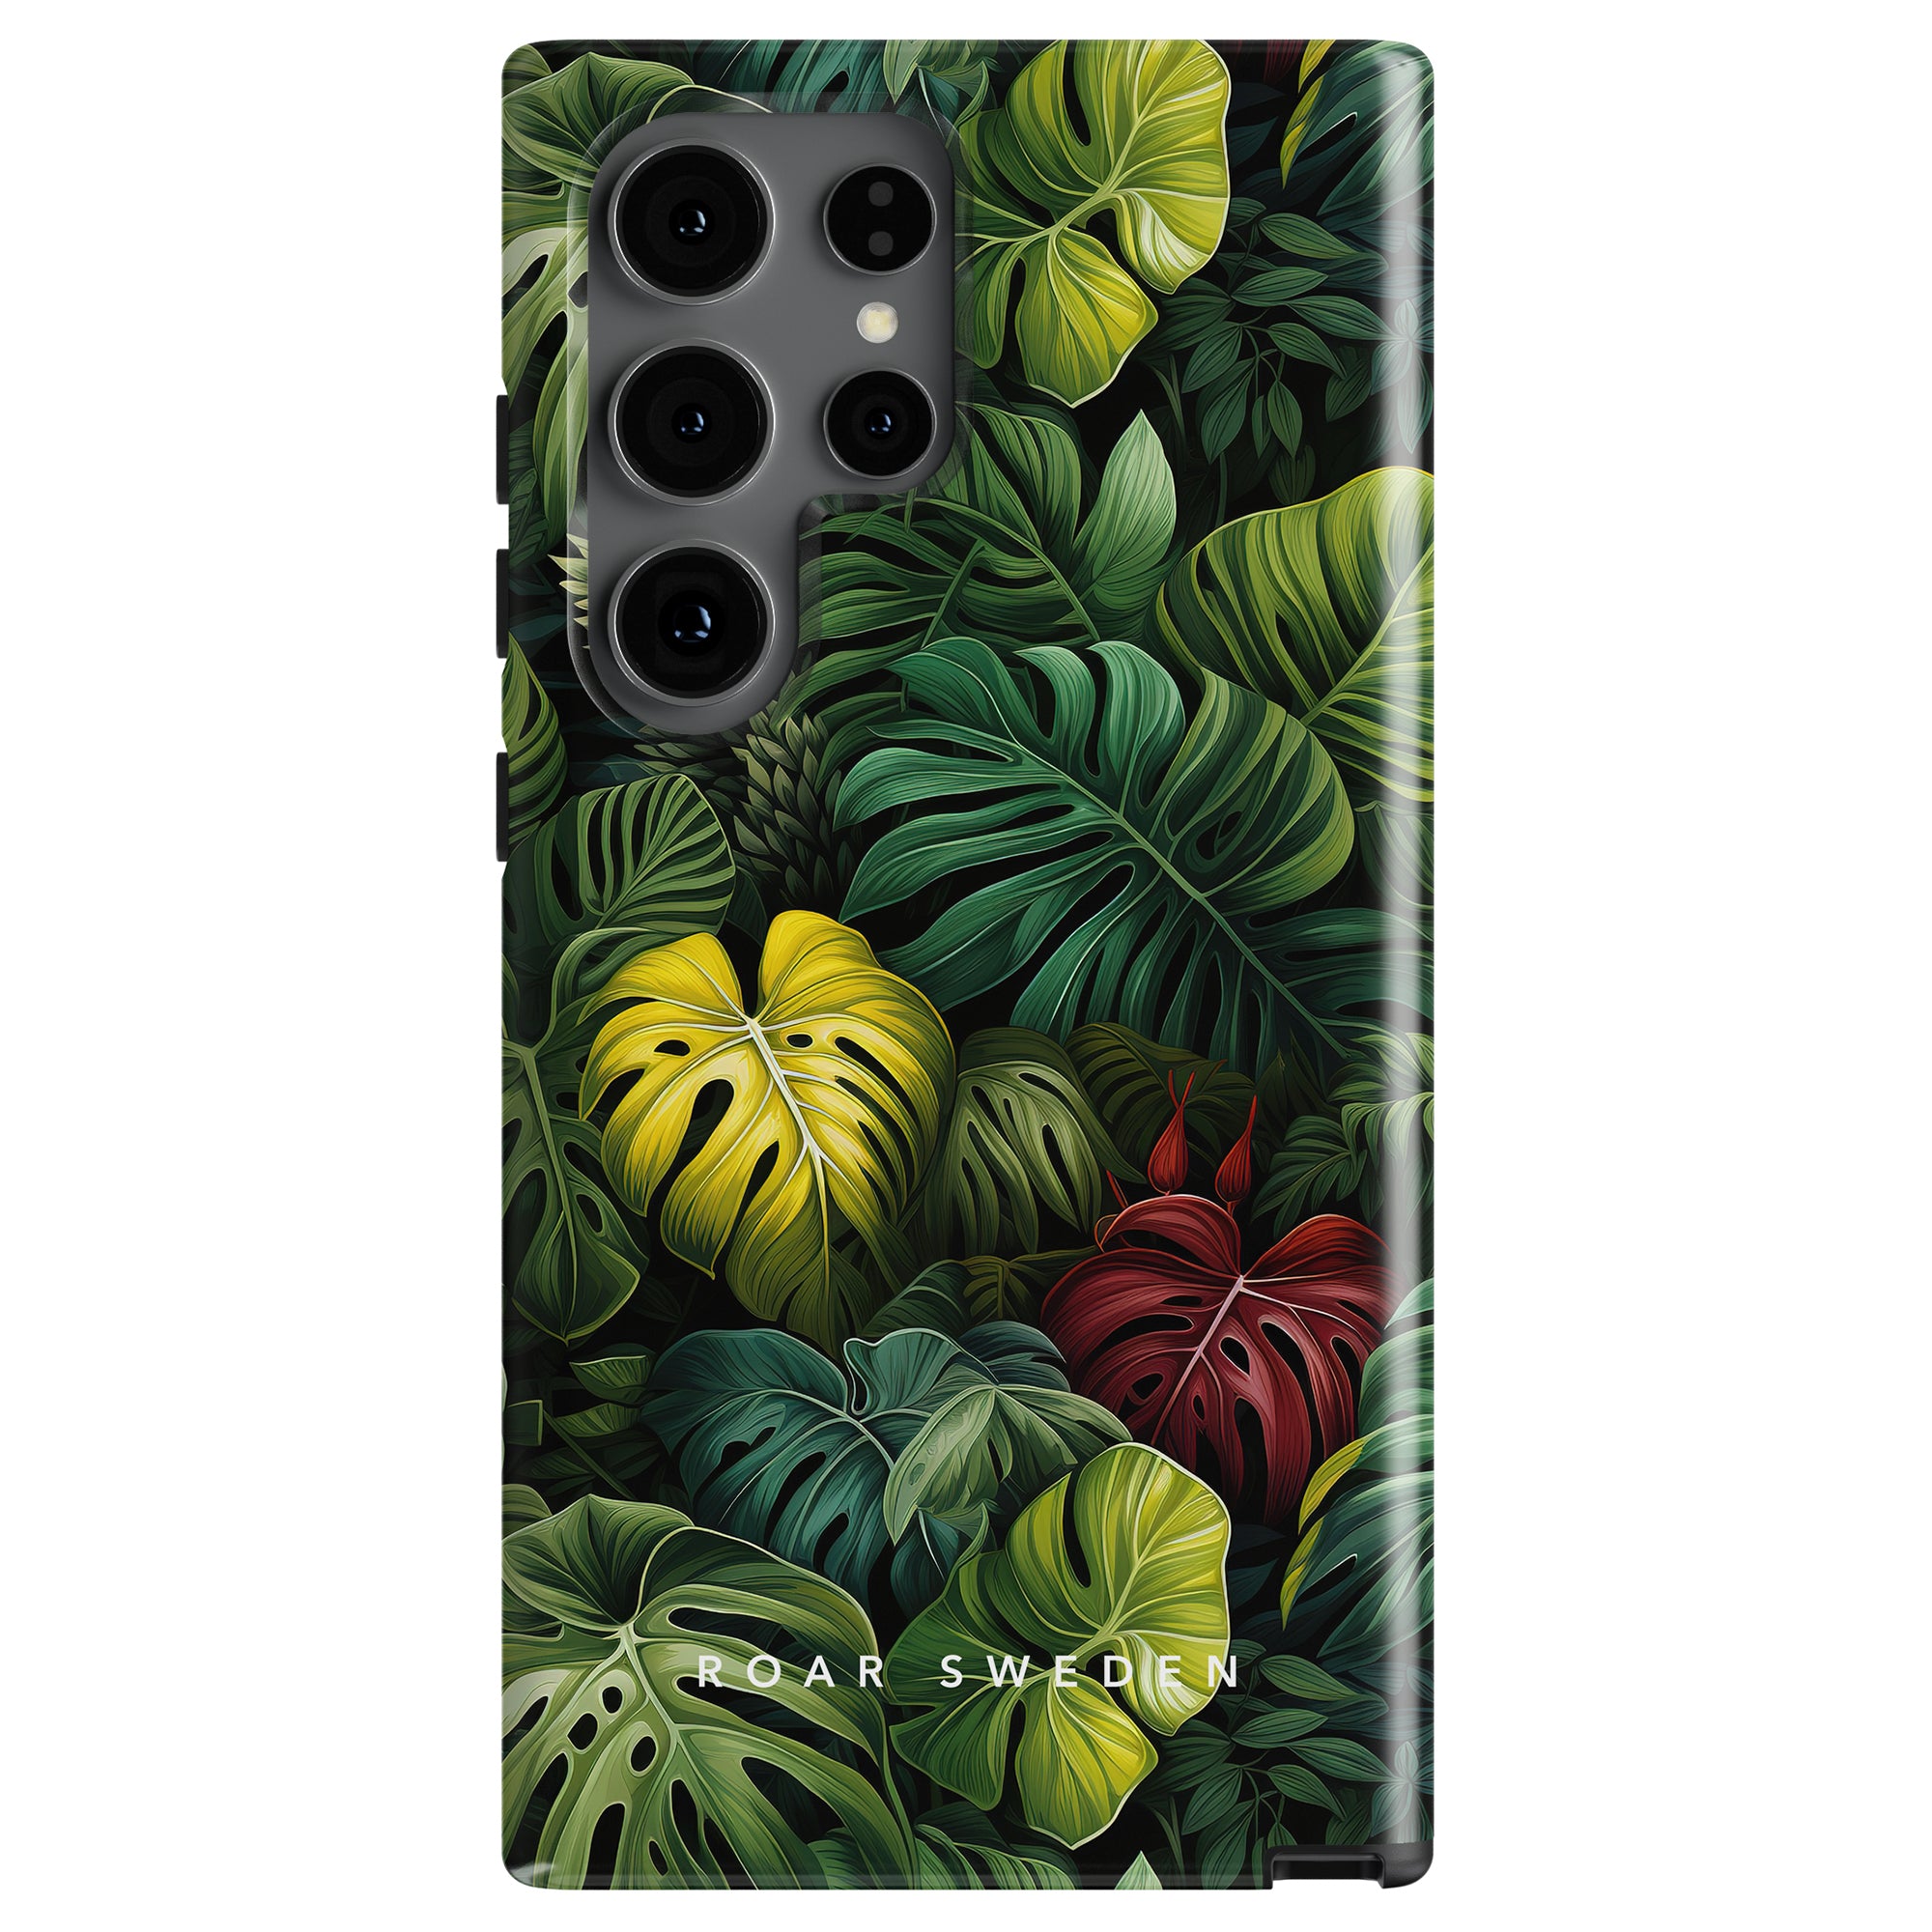 A Deliciosa - Tough Case featuring a vibrant design of green, yellow, and red tropical leaves, including Monstera Deliciosa. Part of the Jungle Collection with "ROAR SWEDEN" elegantly written at the bottom.